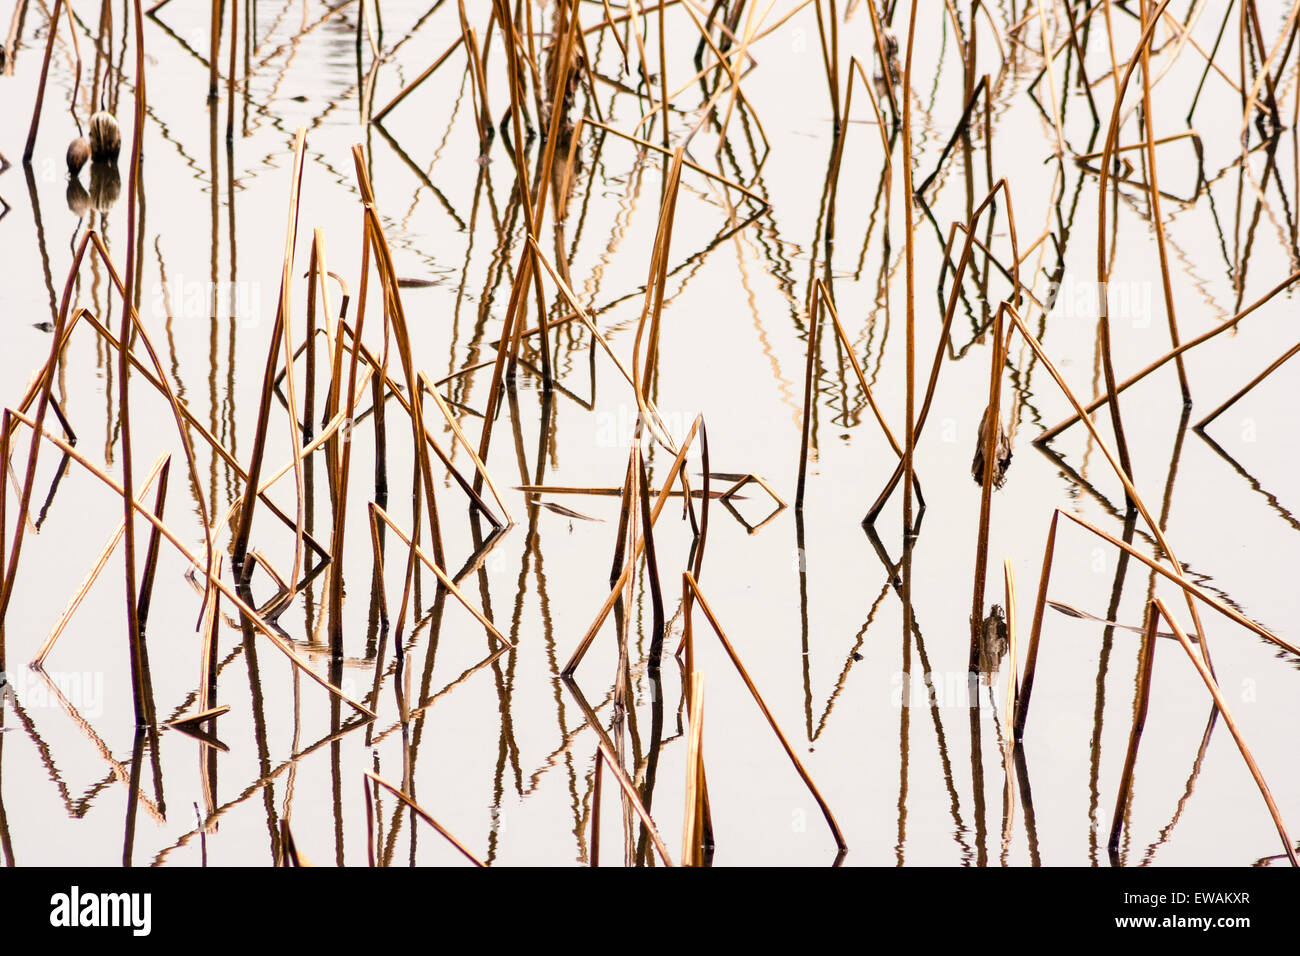 The famous tourist attraction, Genkyu-en garden in Hikone, Japan. Close up of brown reeds in still water with their reflections making abstract pattern. Stock Photo